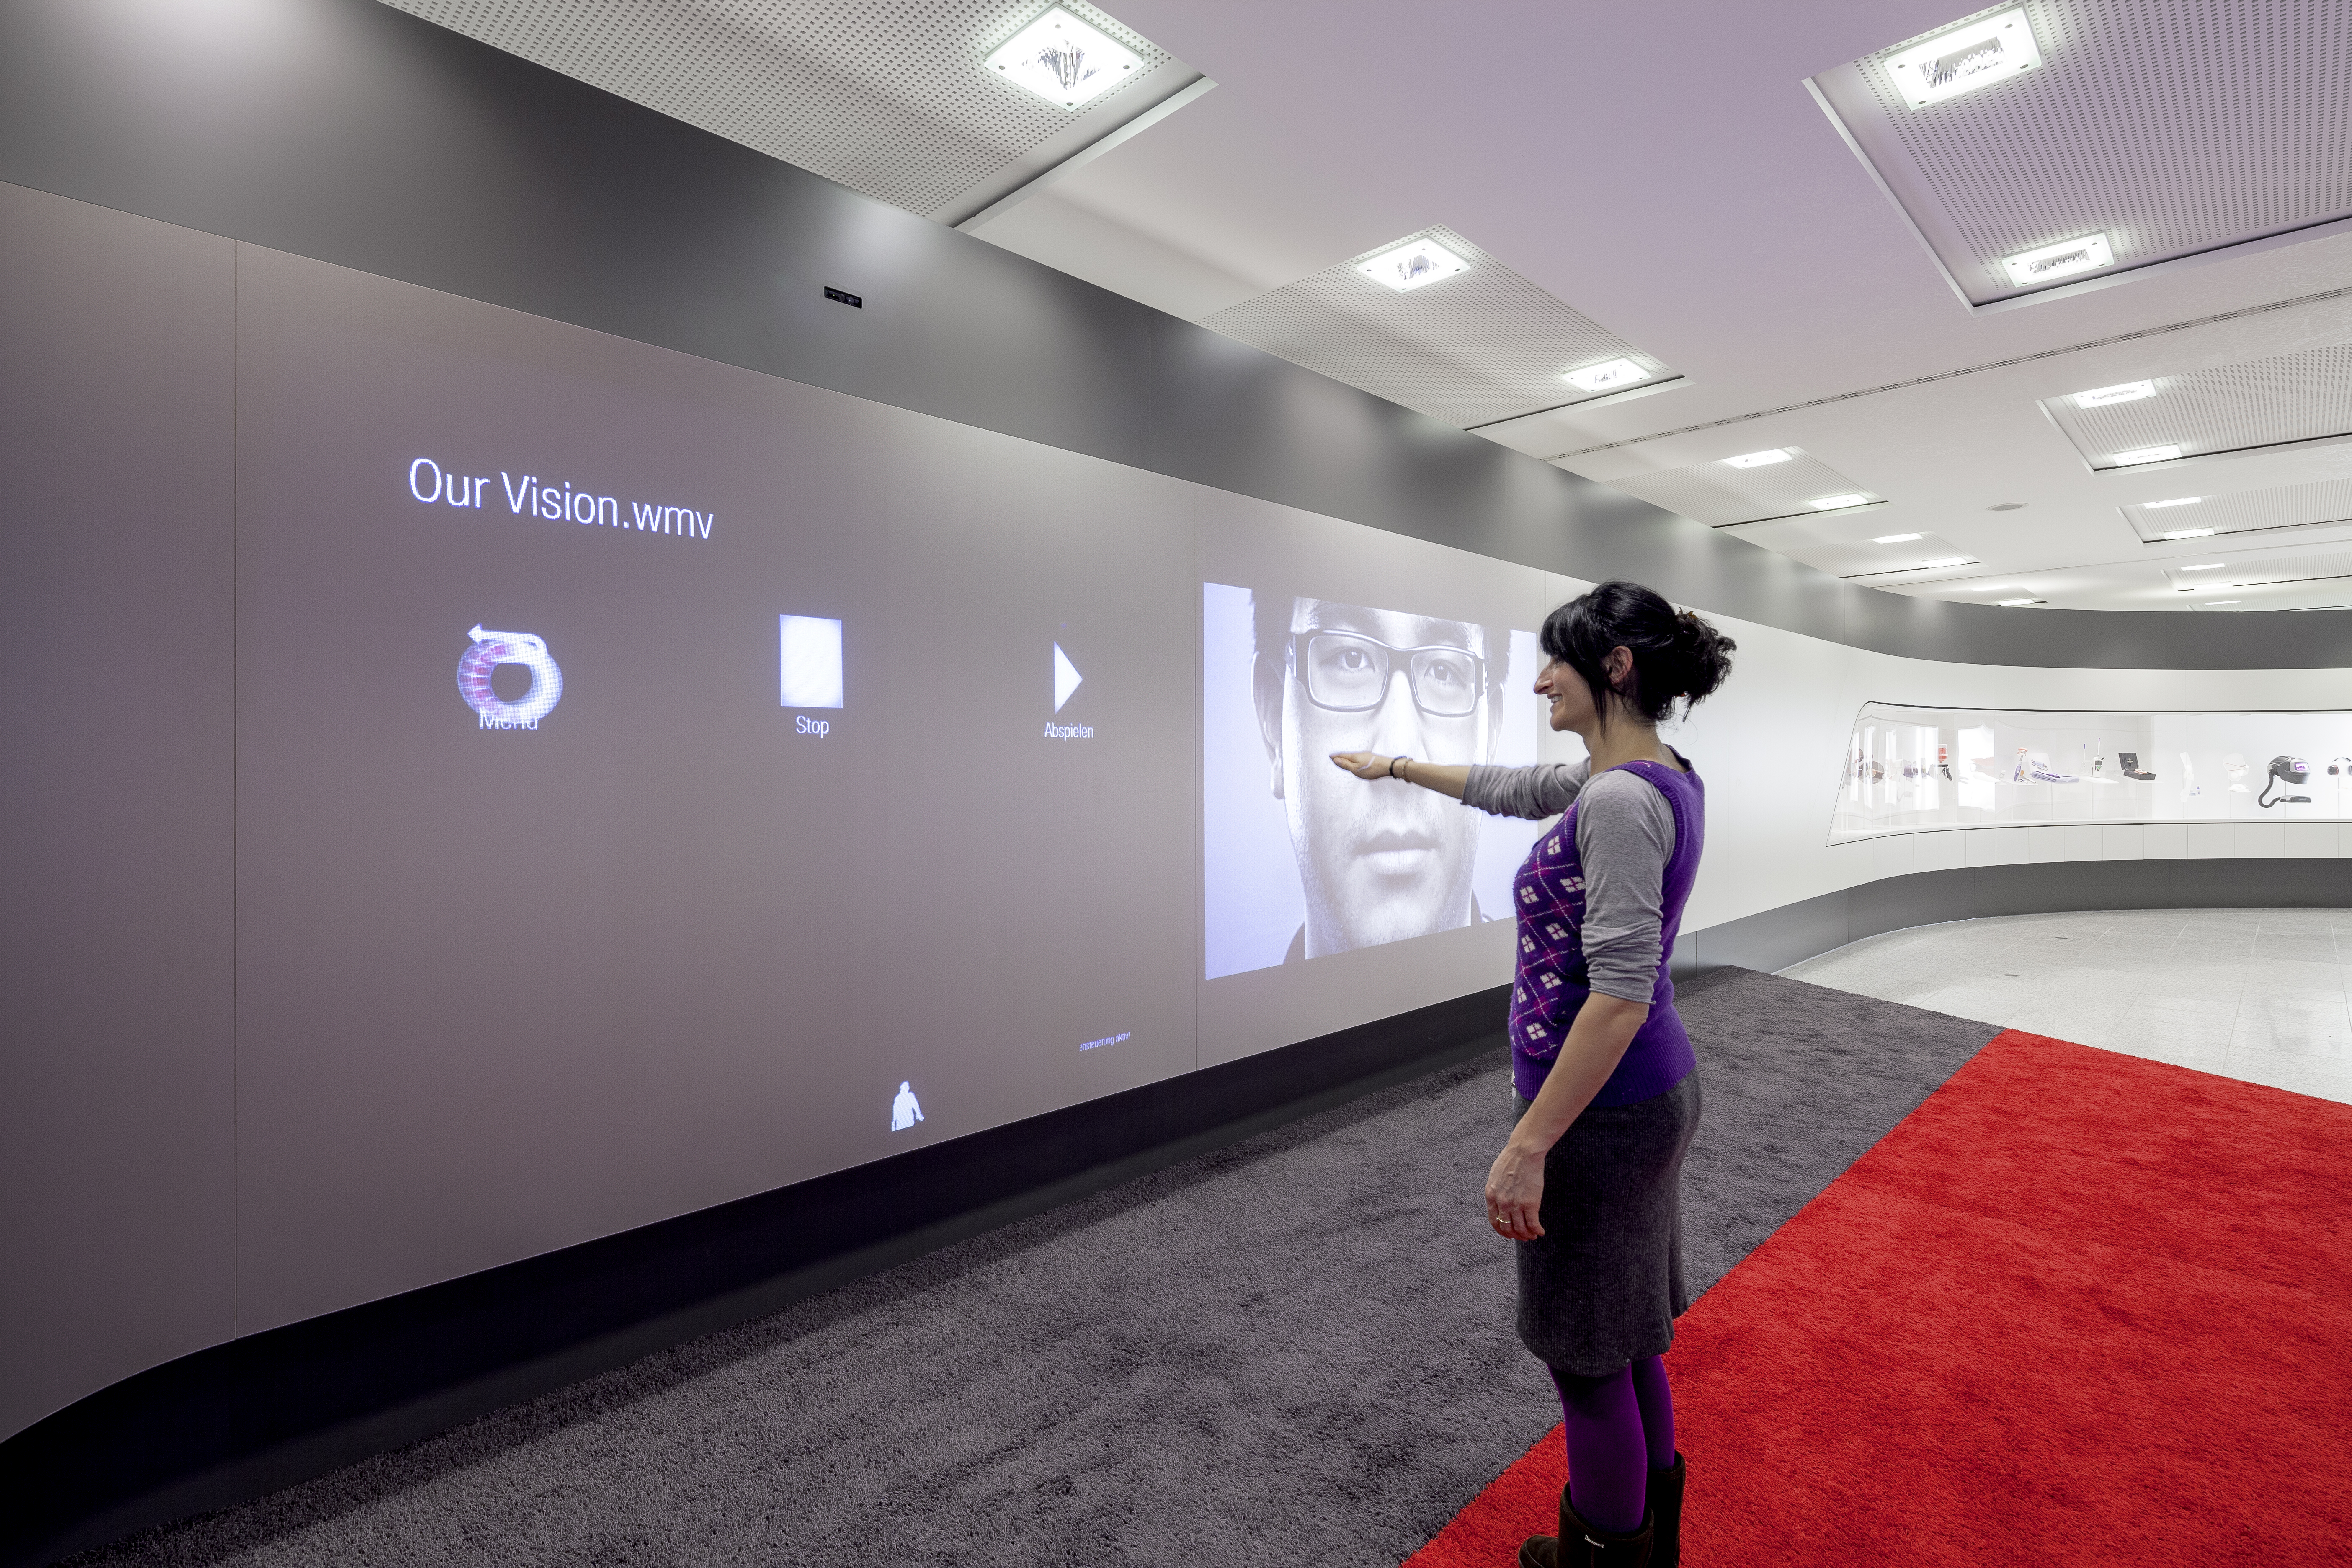 photo 3M World of Innovation boarding waiting area canvas woman operated canvas via gesture control arm